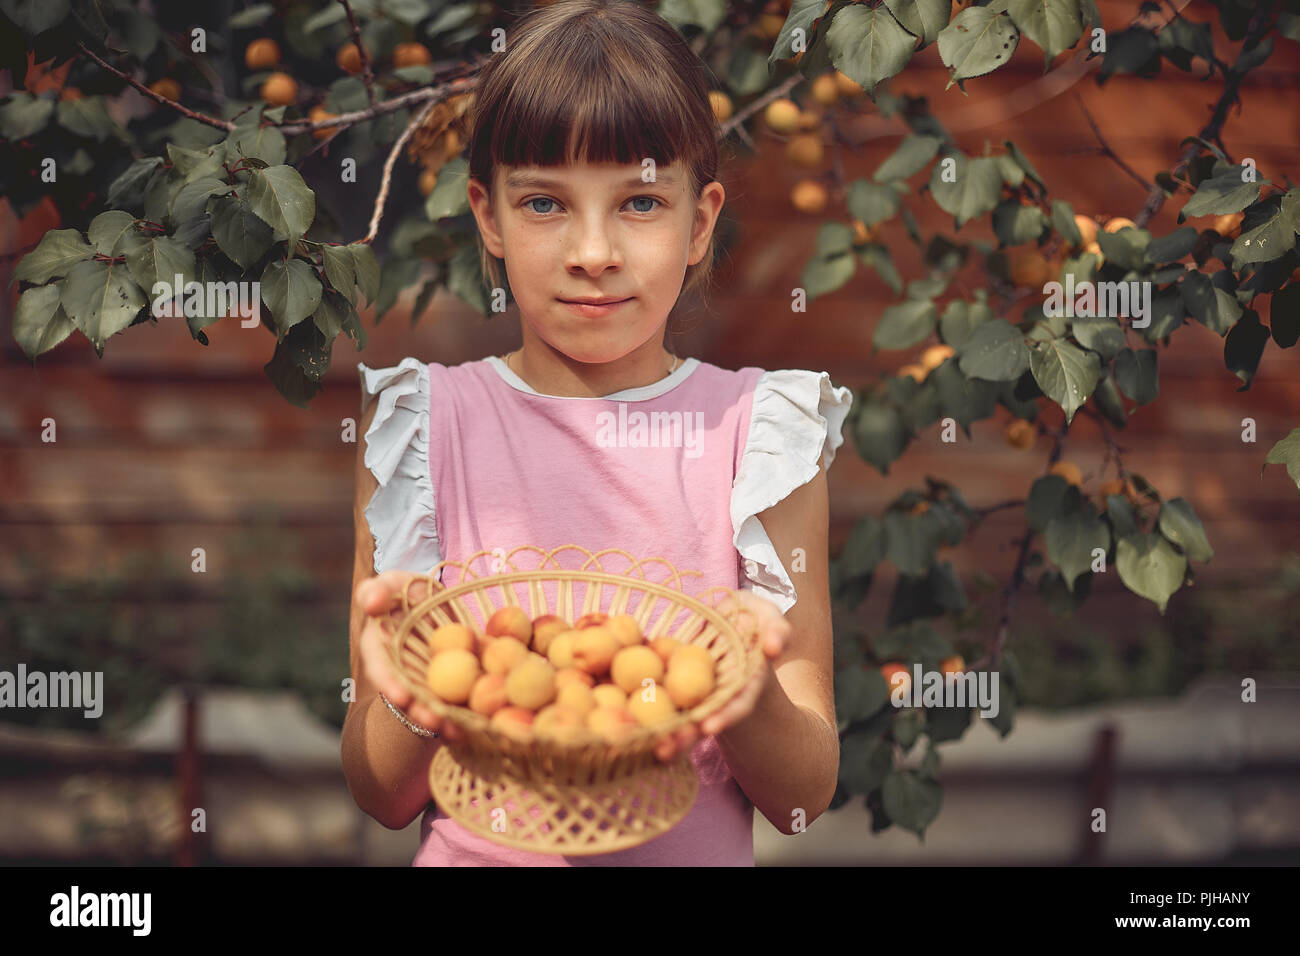 girl holding a wooden basket with ripe apricots. harvest. Stock Photo